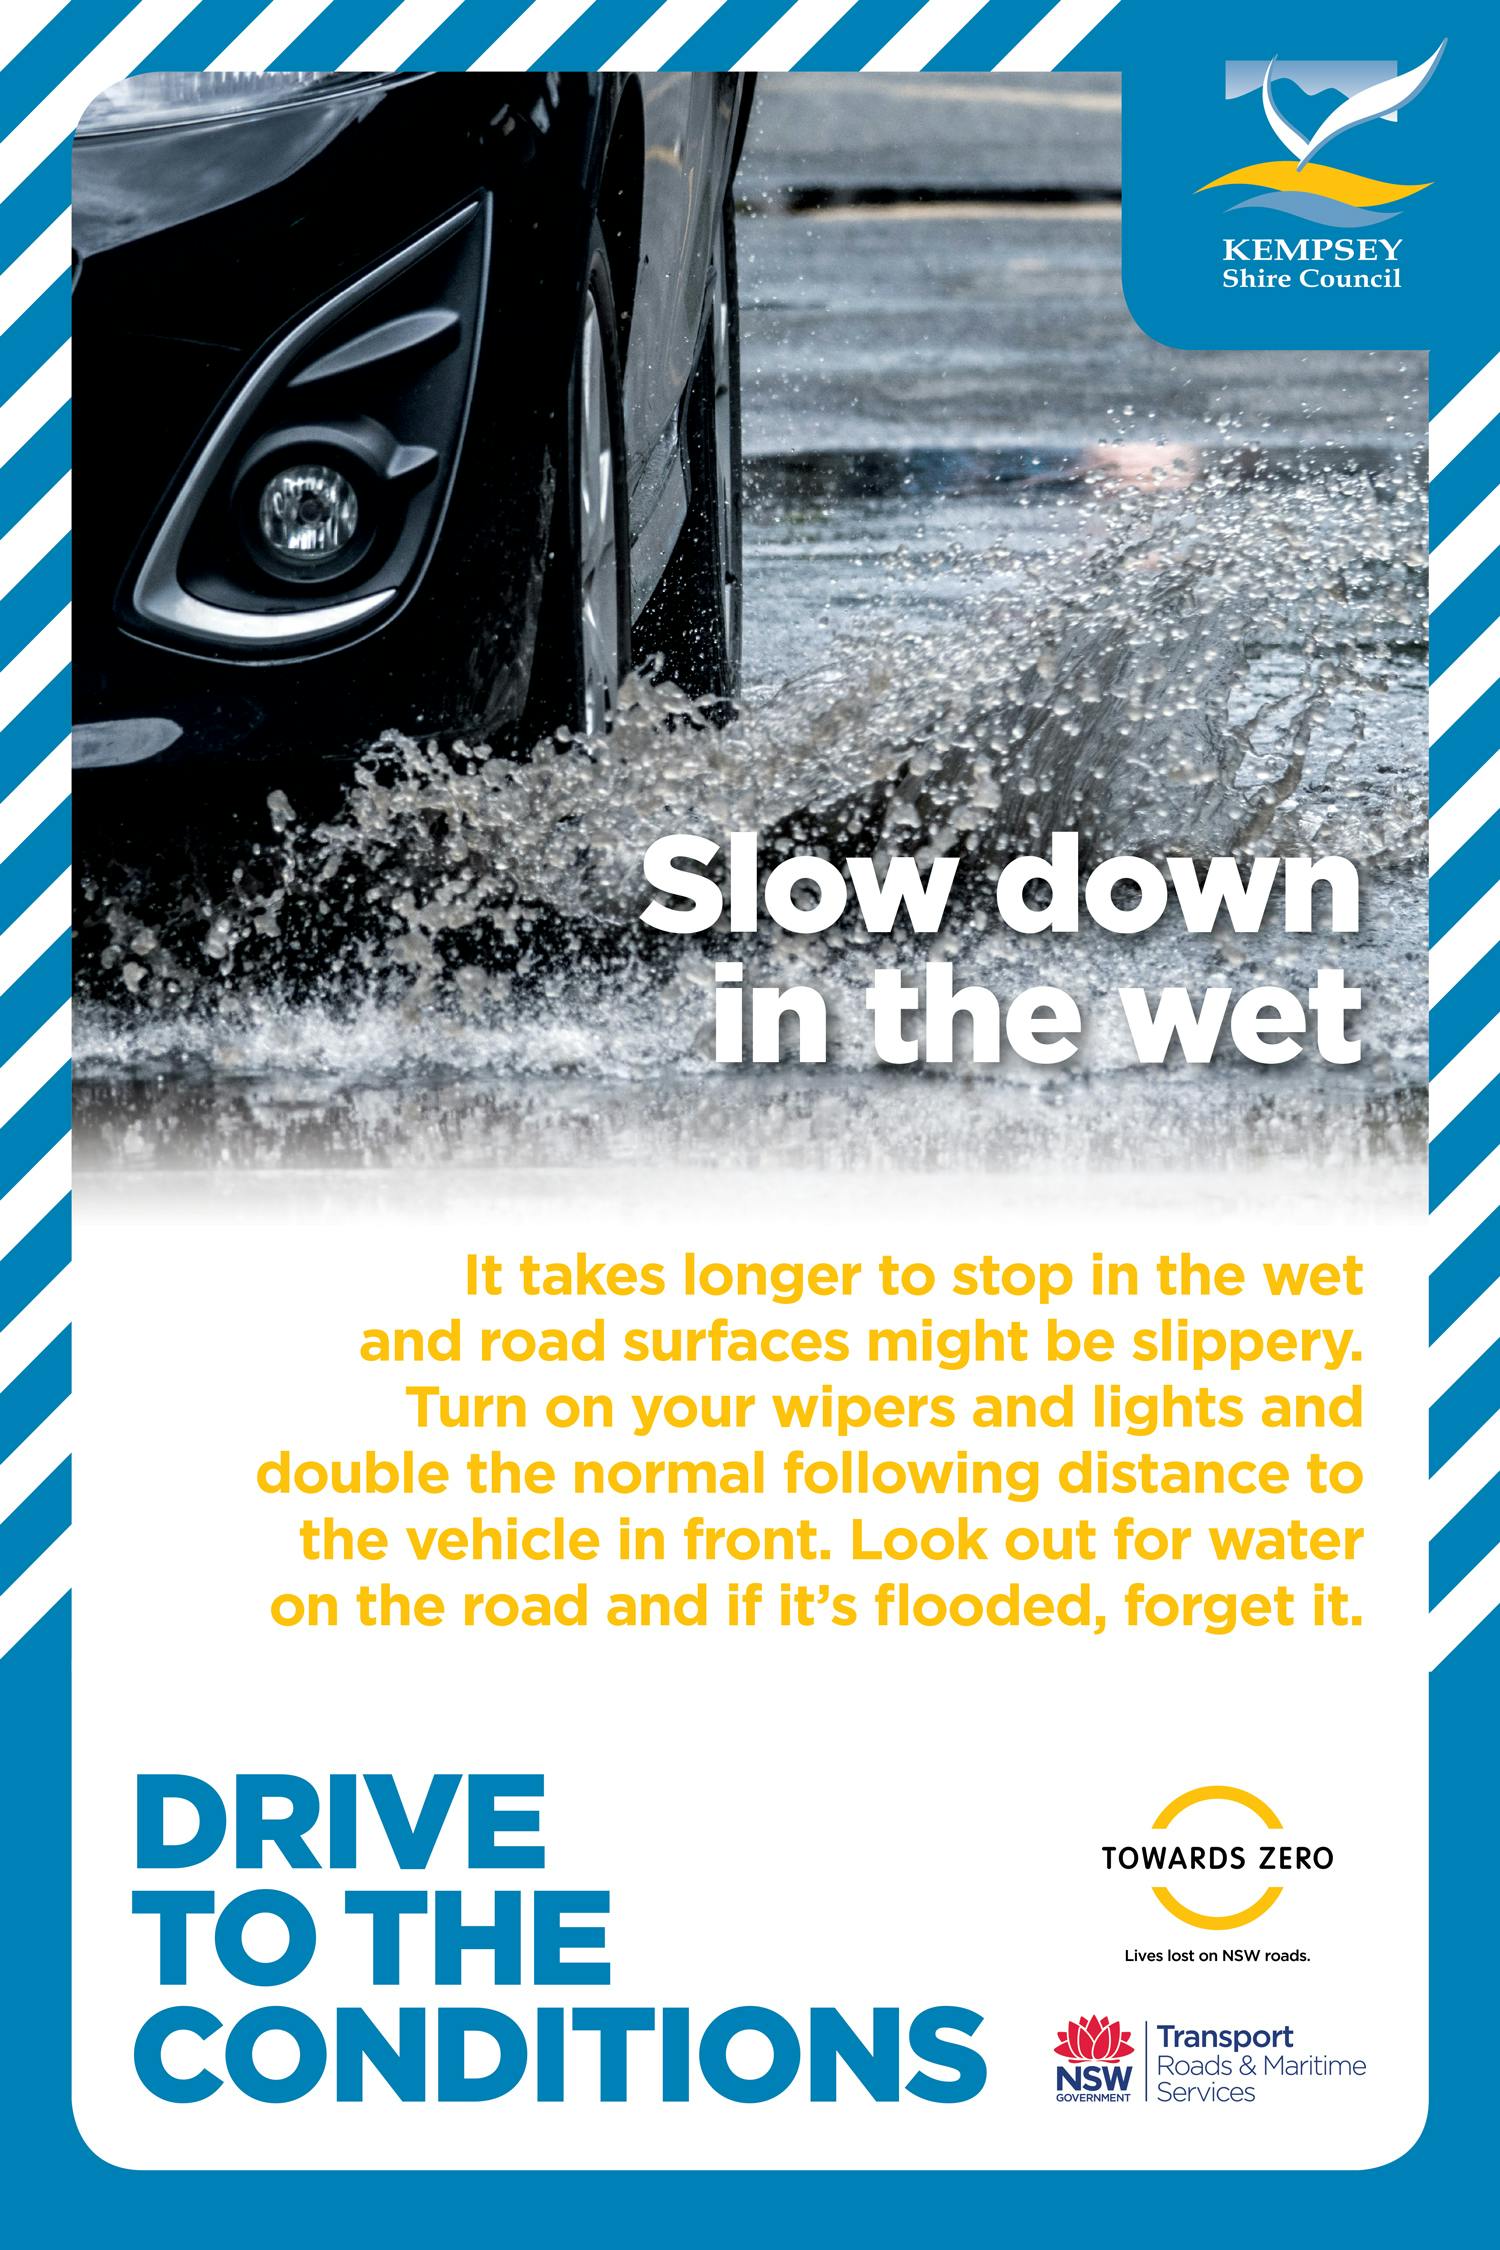 Slow down in the wet